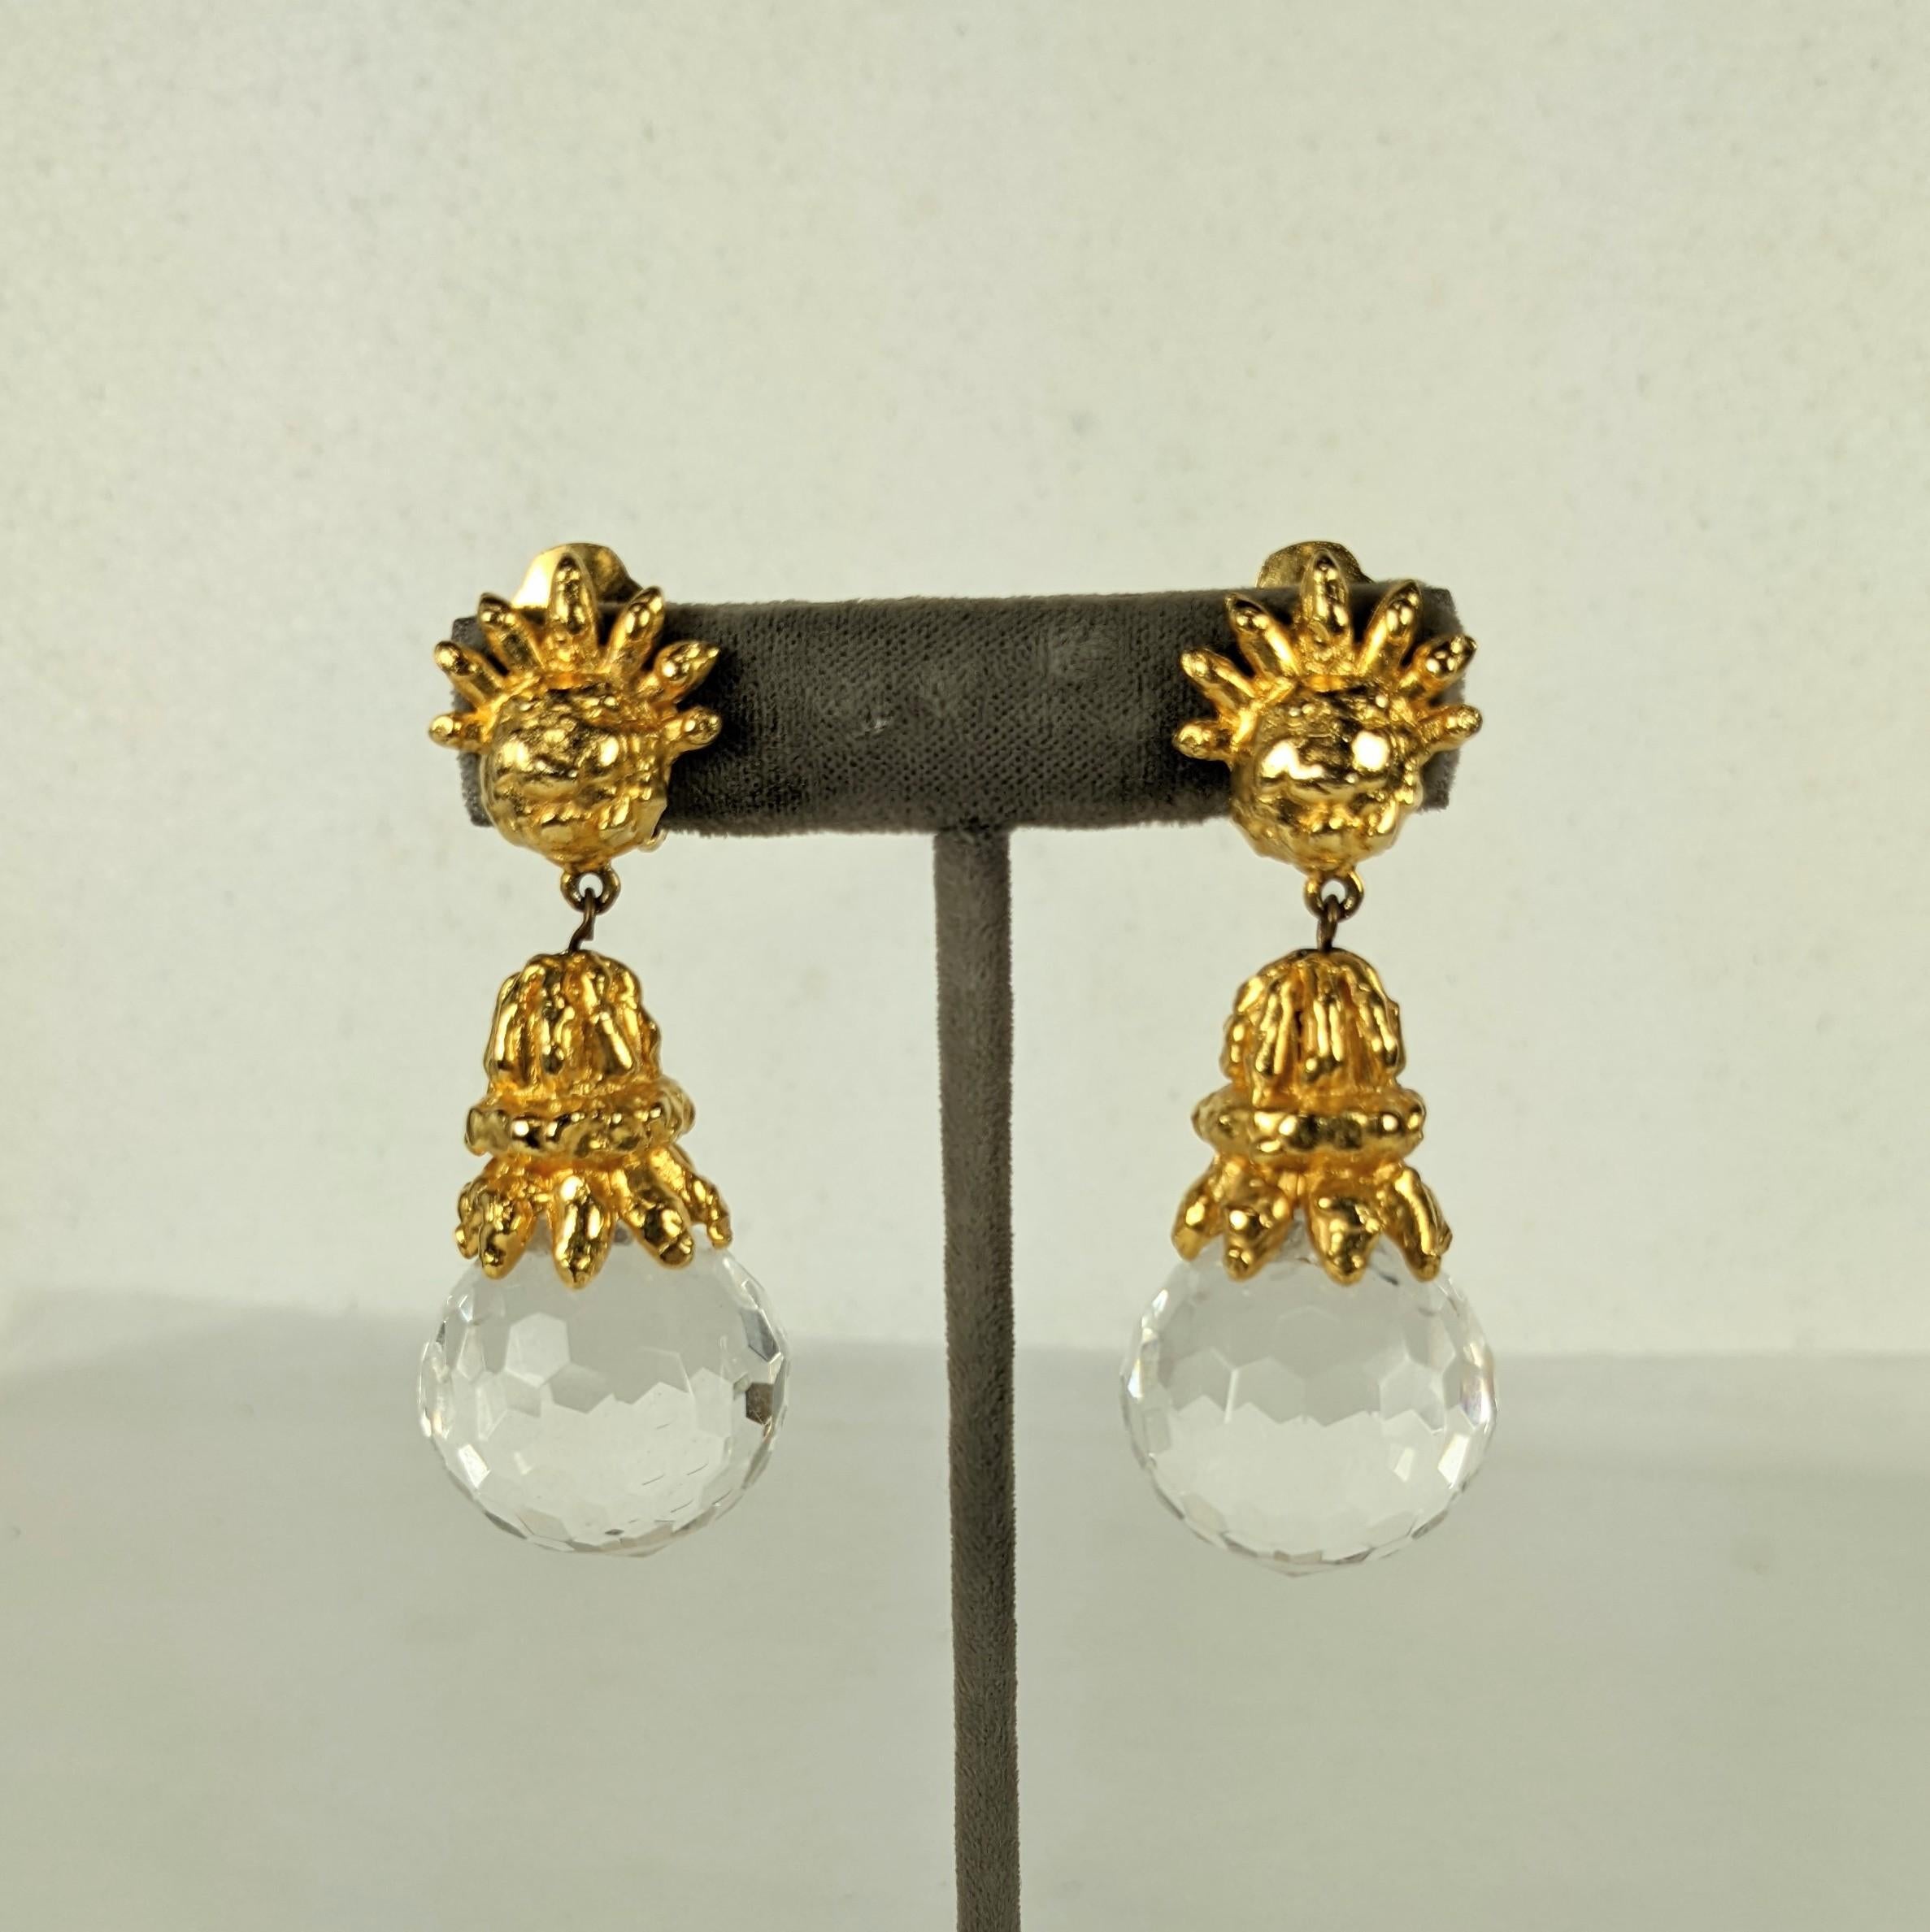 Attractive Early K.J.L. Hammered Gold and Crystal Earrings from the 1960's. Large scale clip earrings in gilt metal and faceted lucite made to replicate the David webb style. Wearable weight with impressive scale. 
Signed K.J.L. early mark.   1960's